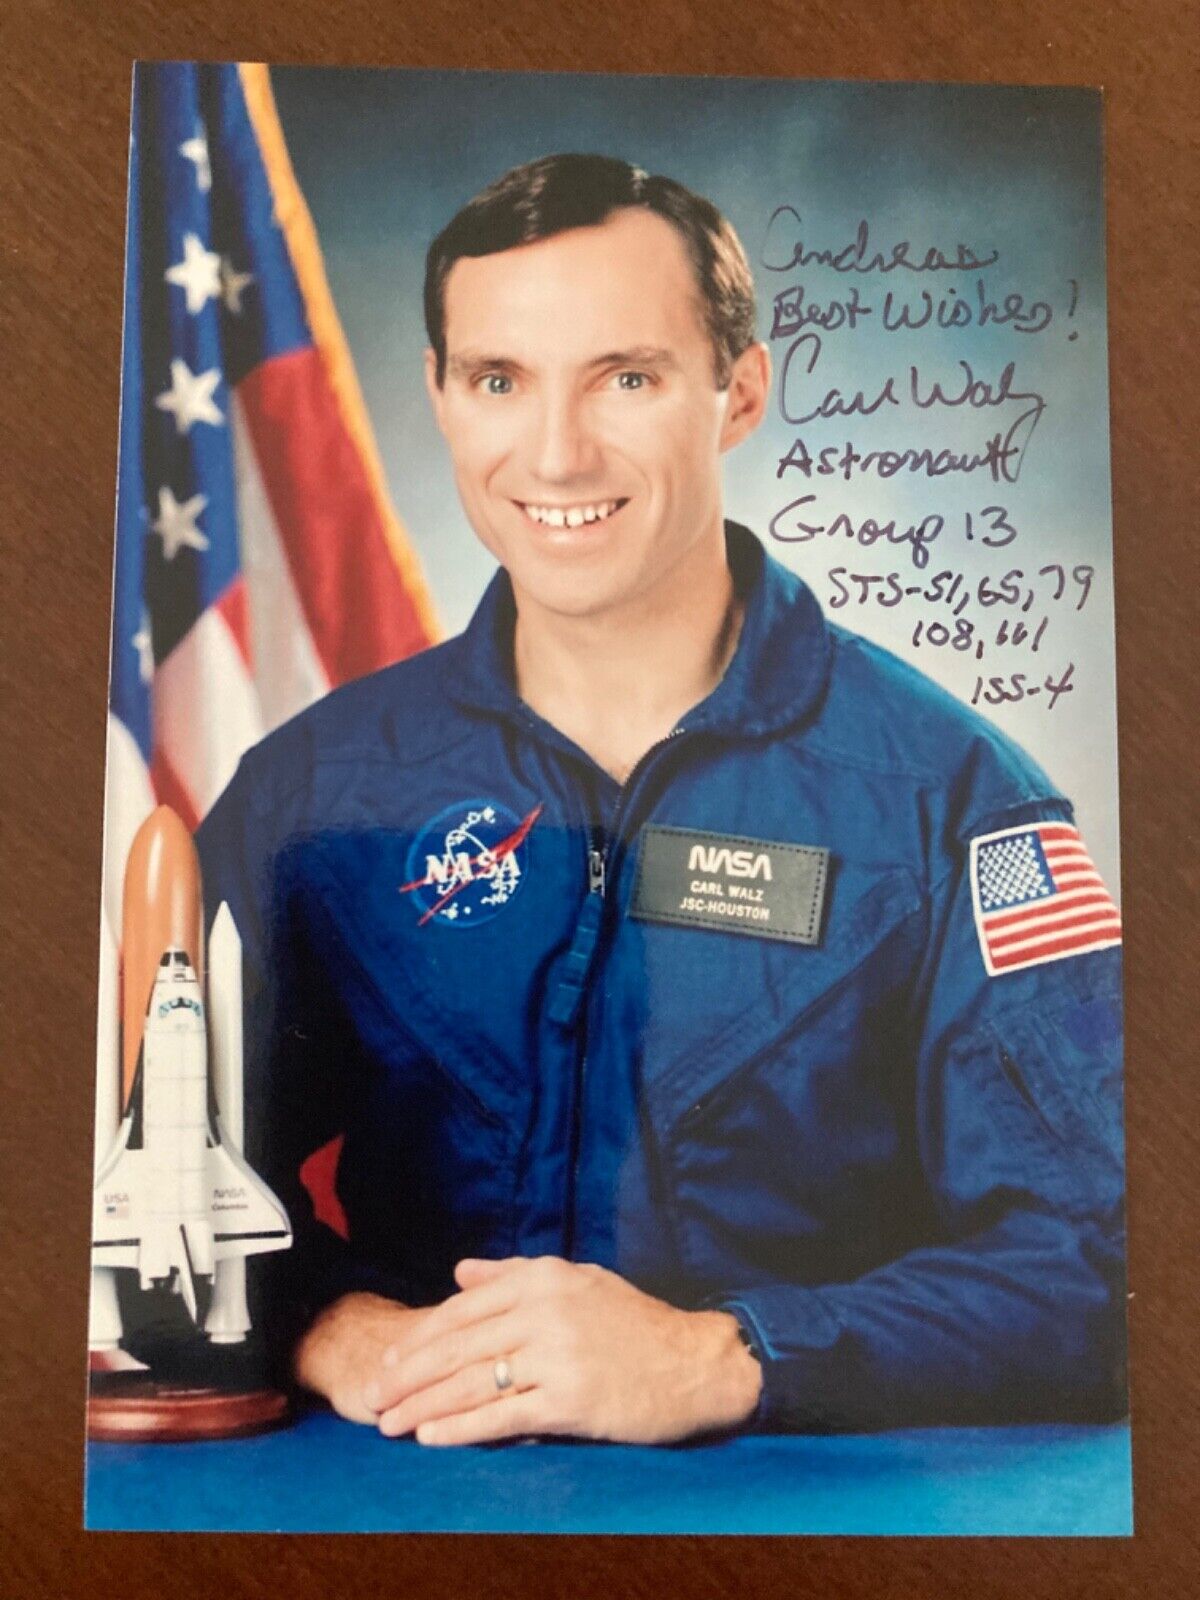 Carl E. Walz, NASA Astronaut-230 Days in Space-4 Space Missions-Signed Photo-COA